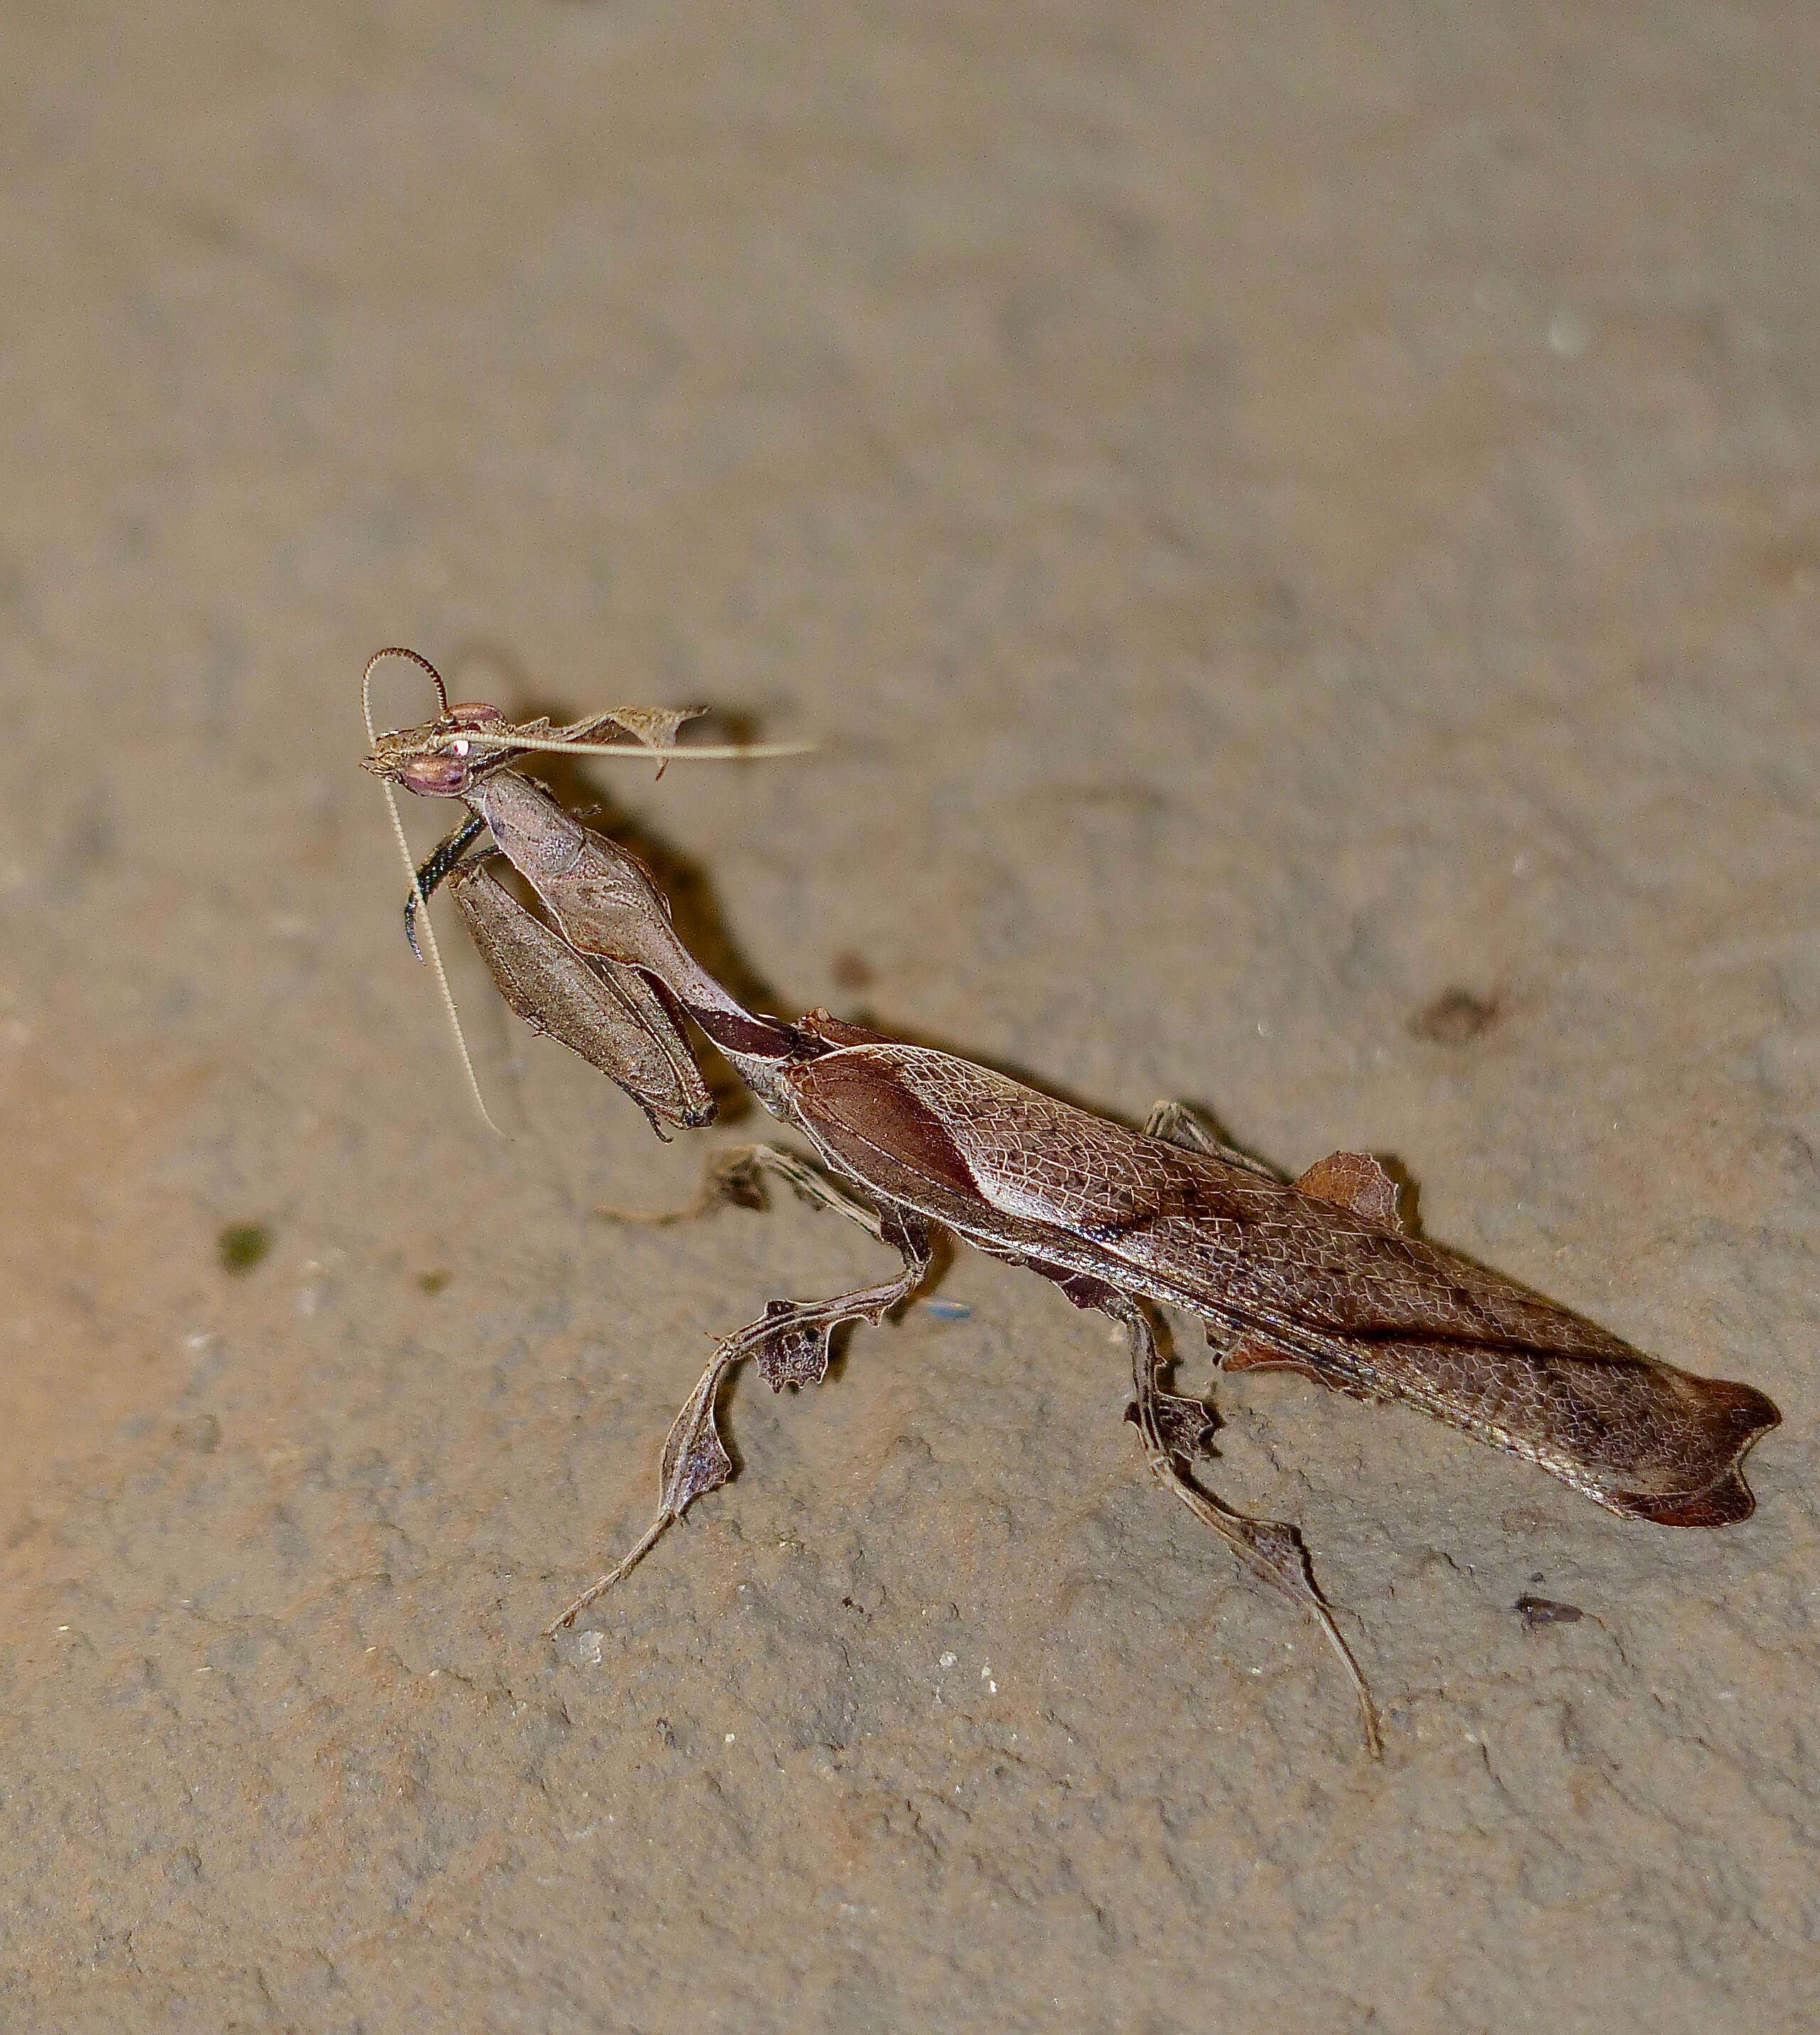 Image of Dictyoptera